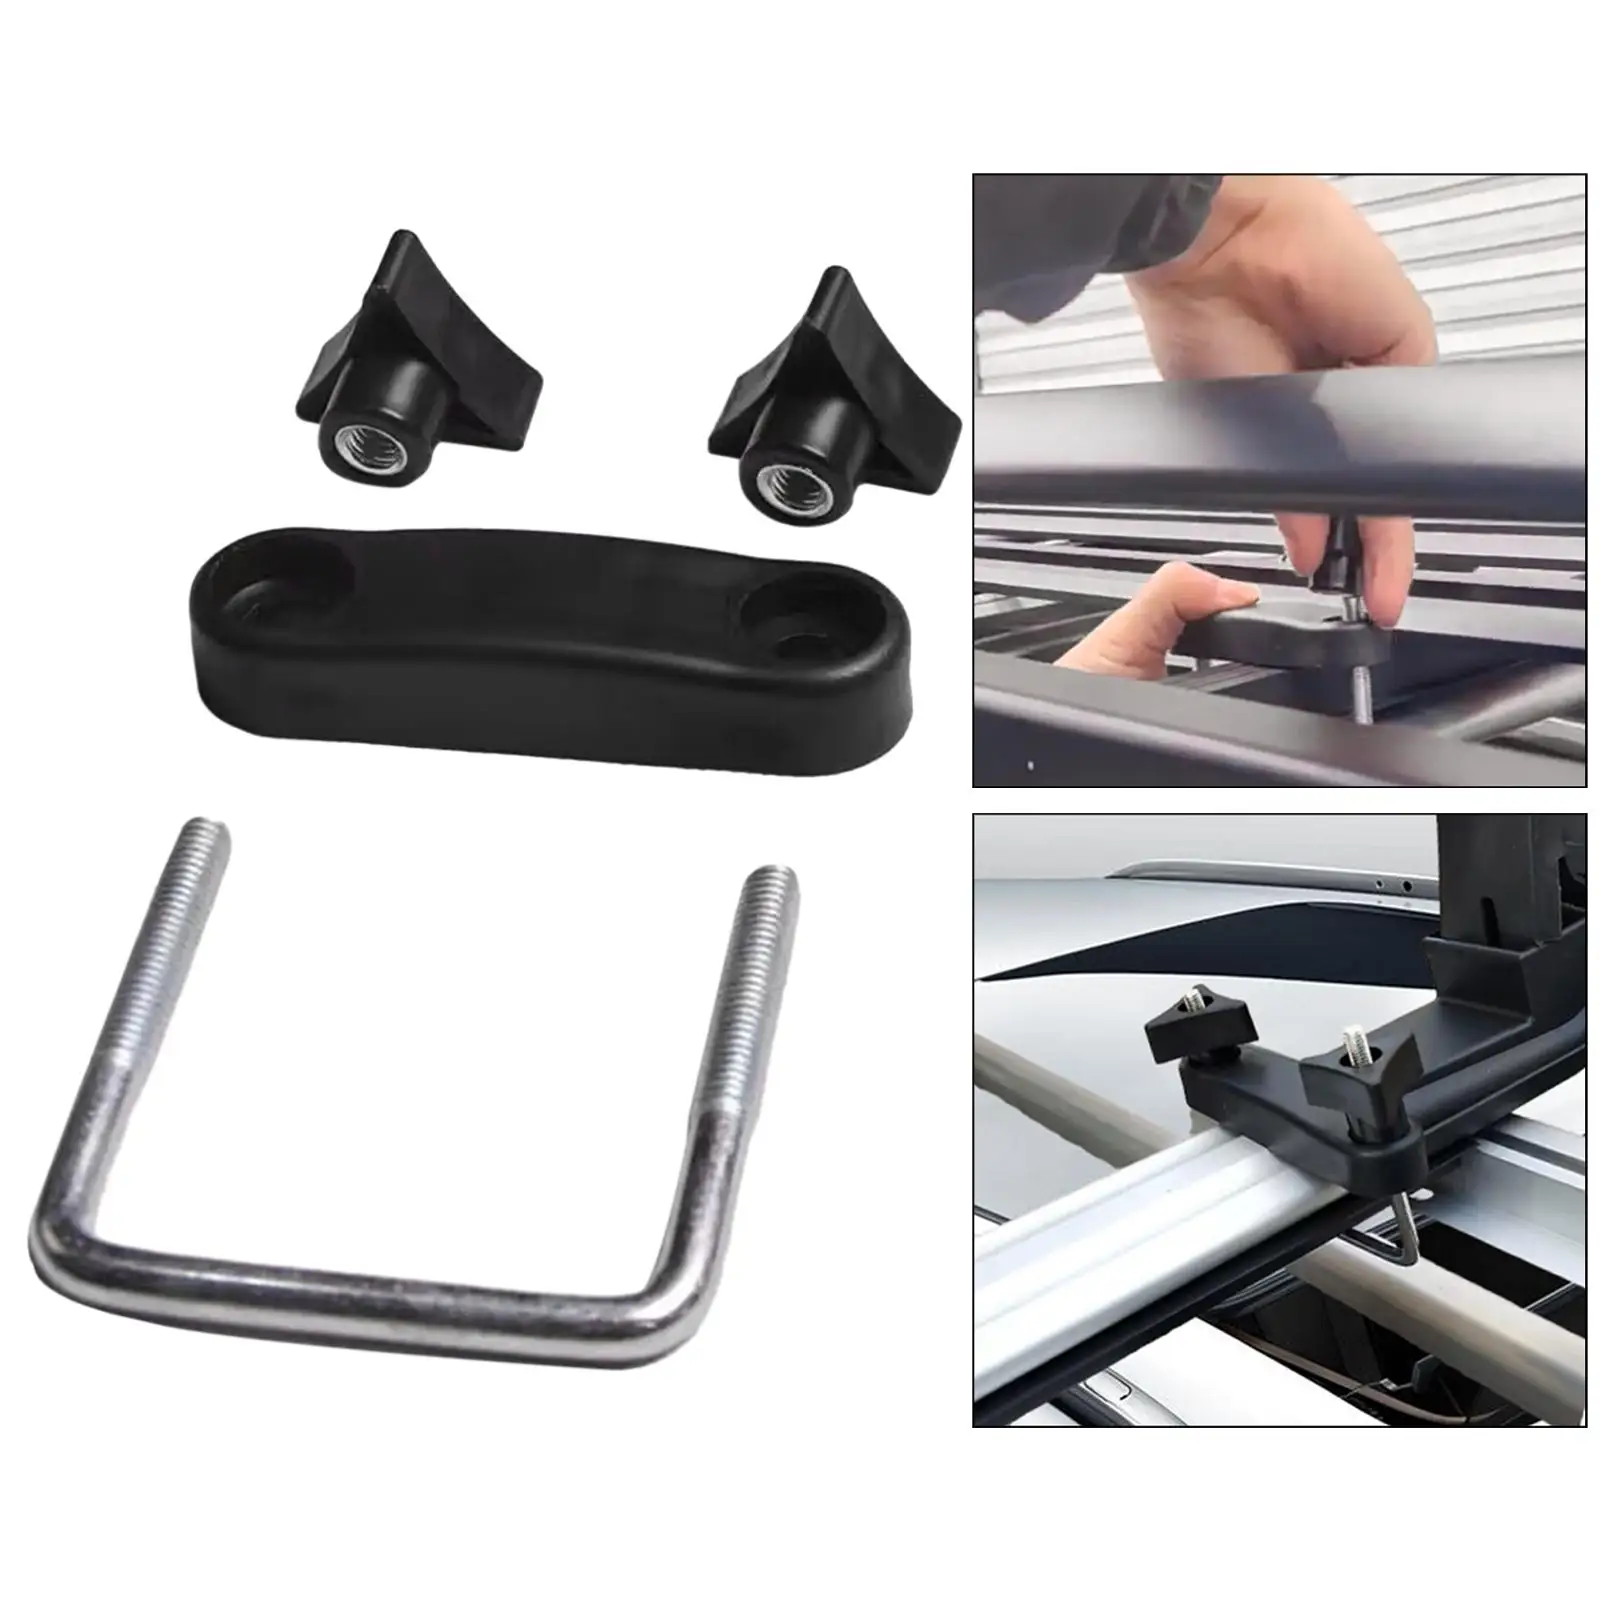 Roof Box U Bolt Clamps Metal Rooftop Cargo Carrier Rack Bolts Roof Rack Luggage Carrier Accessories for Automobiles Vehicle